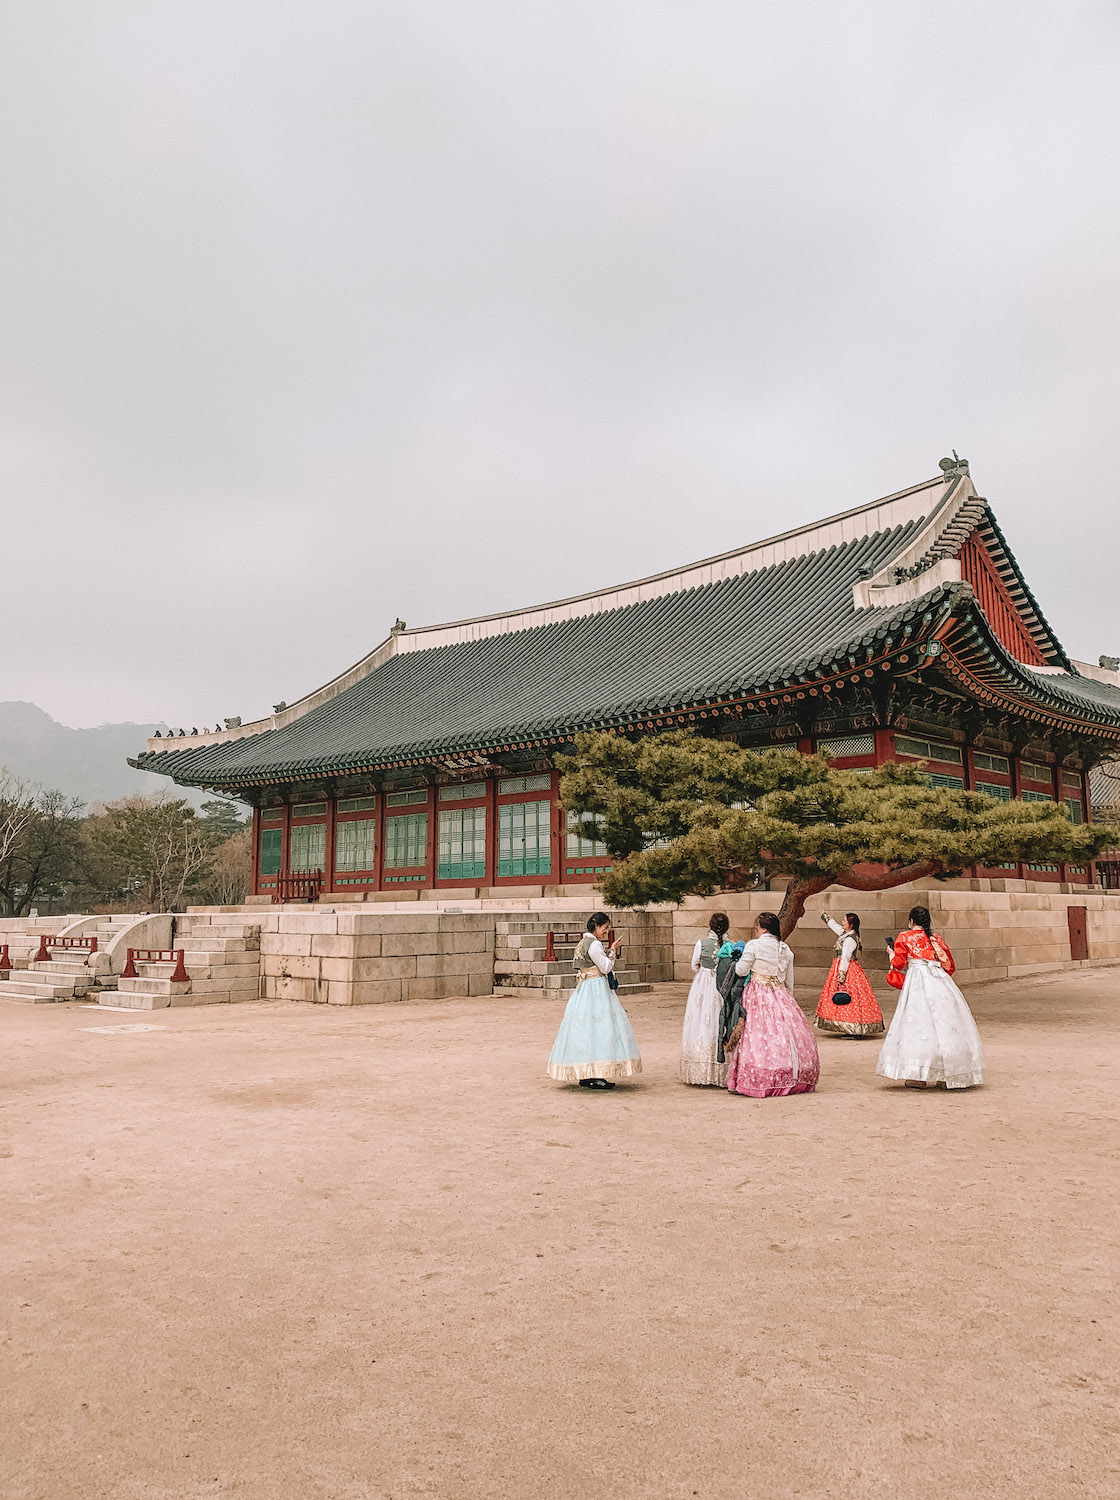 An old Korean palace can be seen behind a tree and 5 girls are posing for photos wearing traditional Korean dress. Here I recap the holidays I had this year